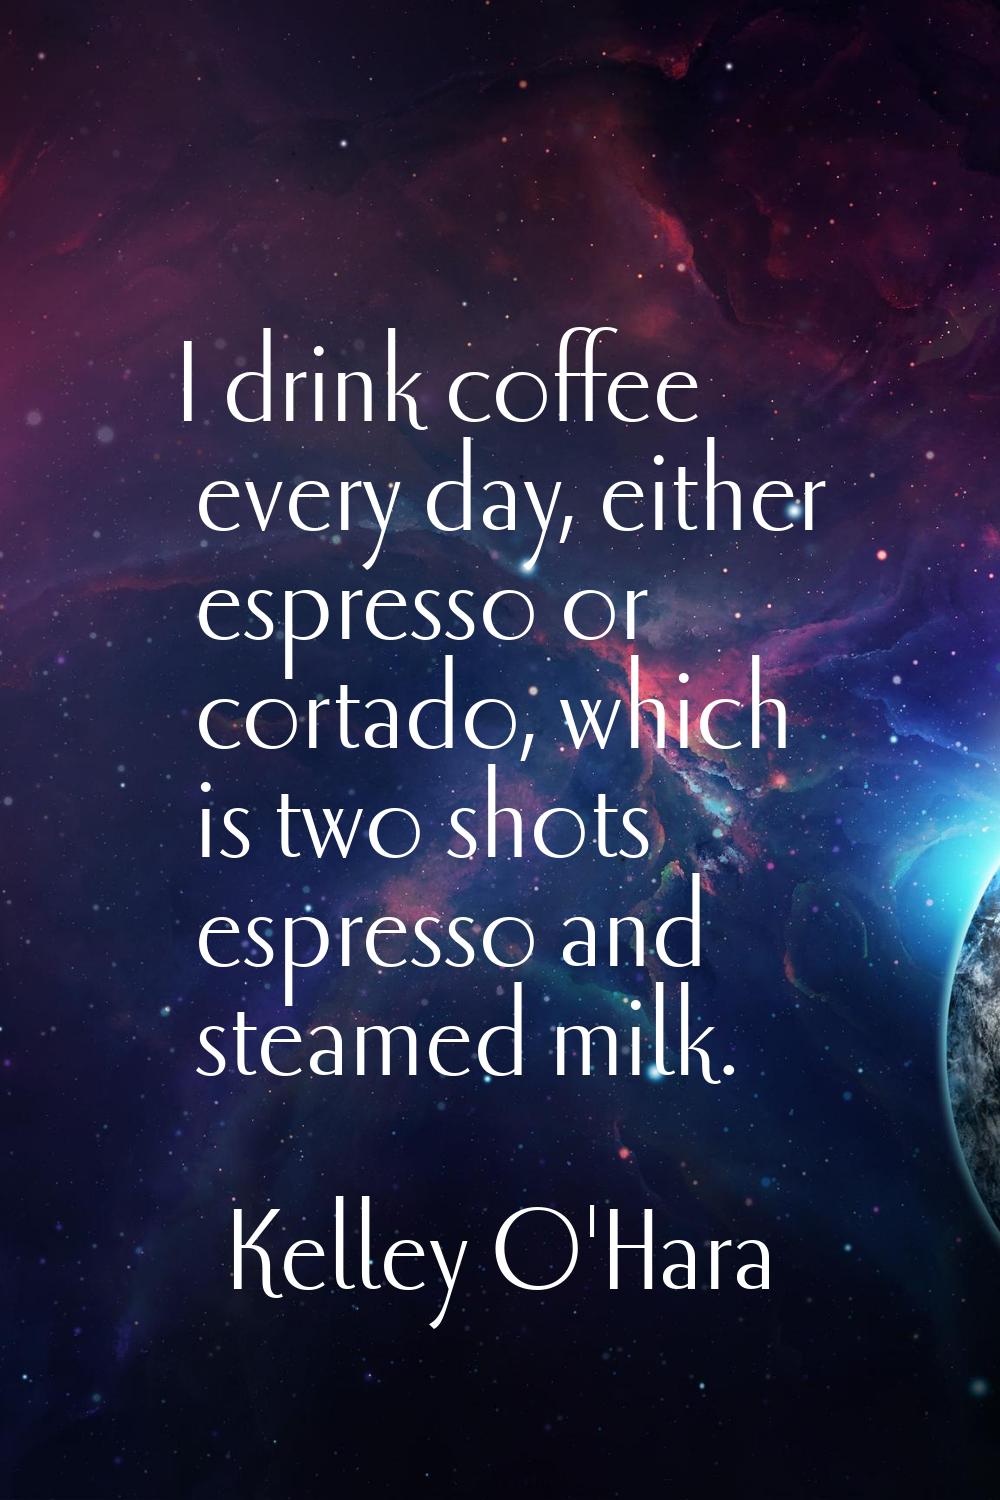 I drink coffee every day, either espresso or cortado, which is two shots espresso and steamed milk.